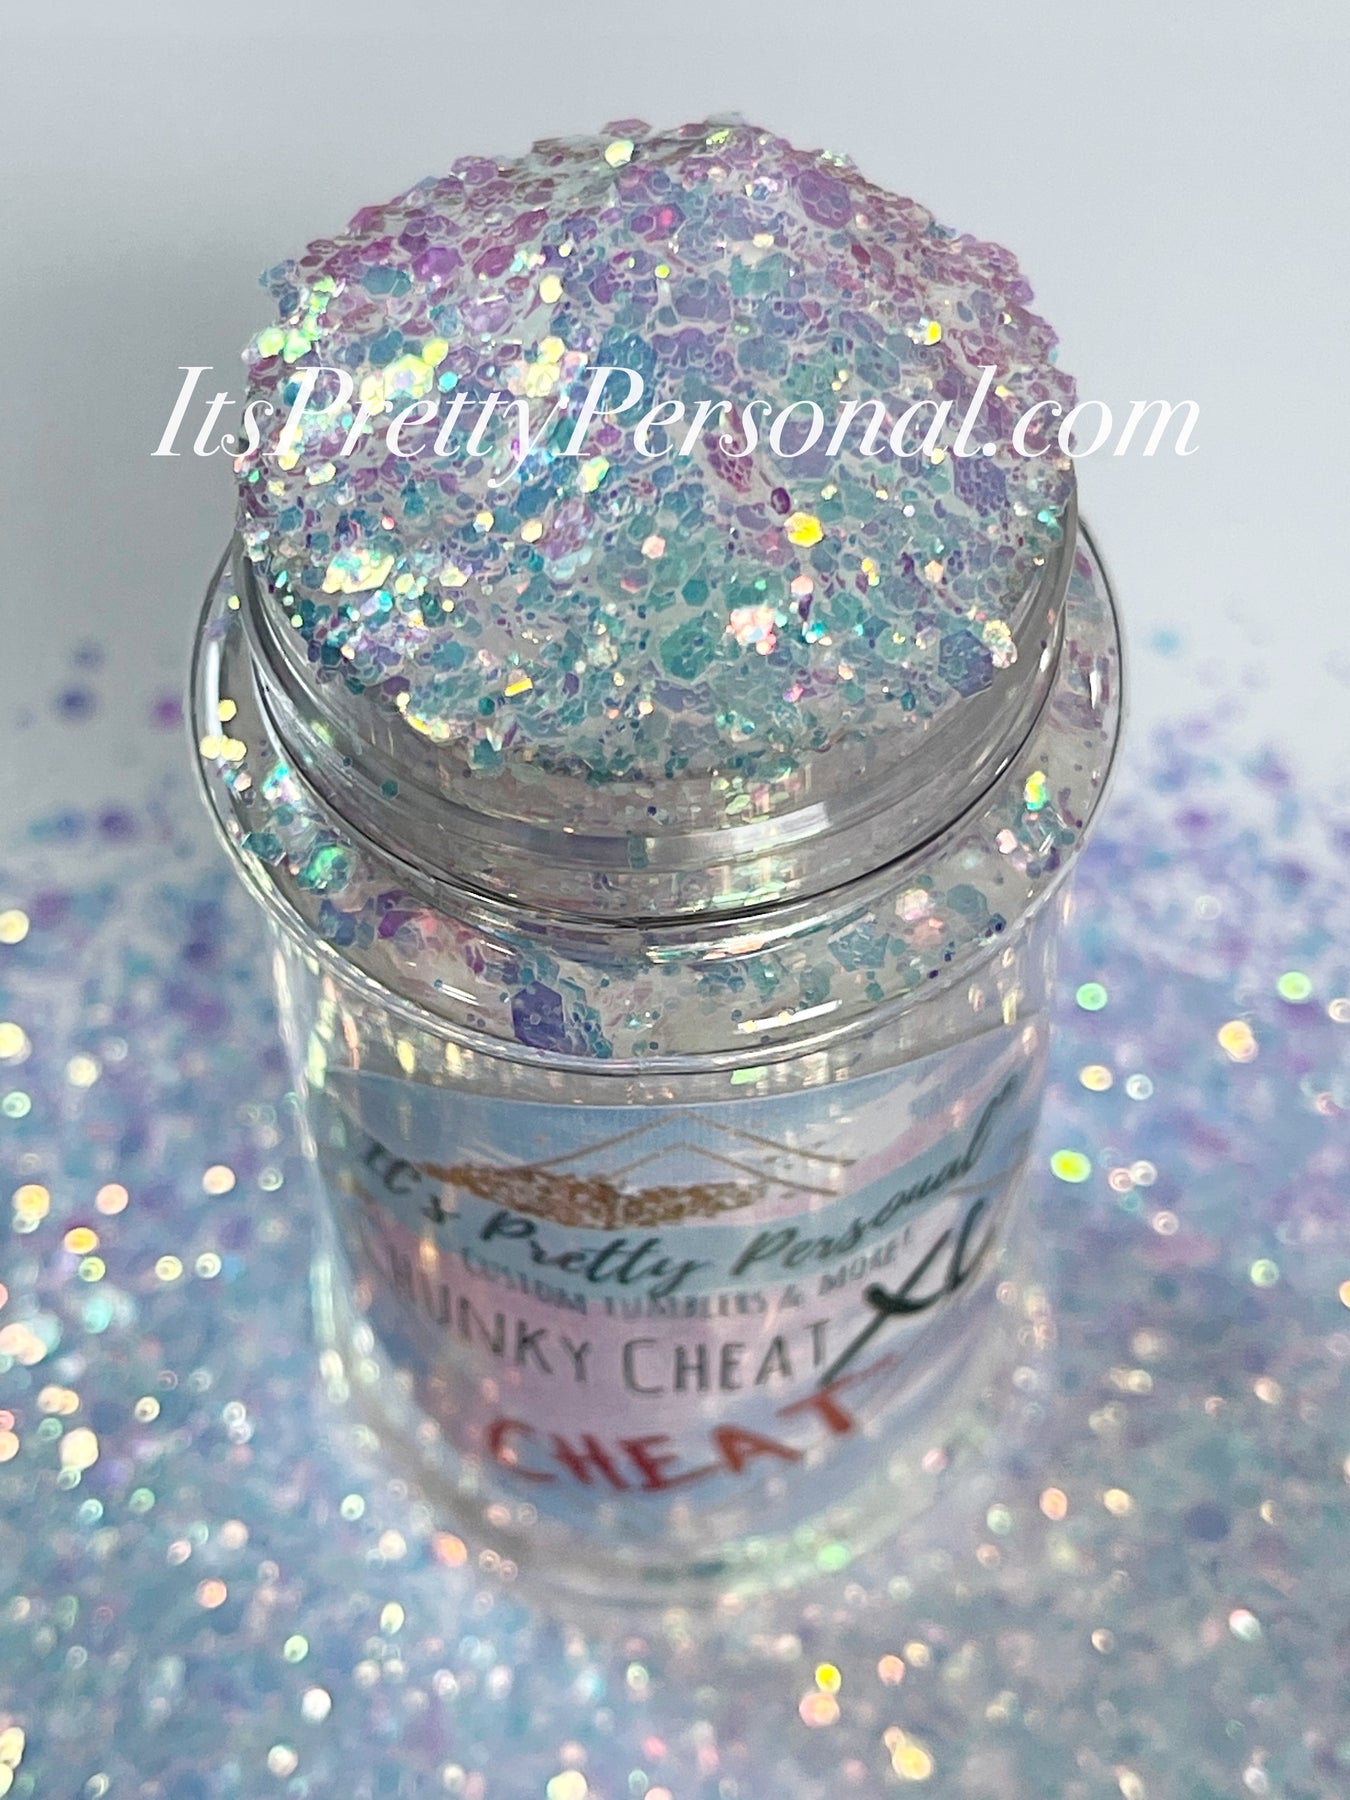 Home of the shiniest glitter! – Glitter Makes It